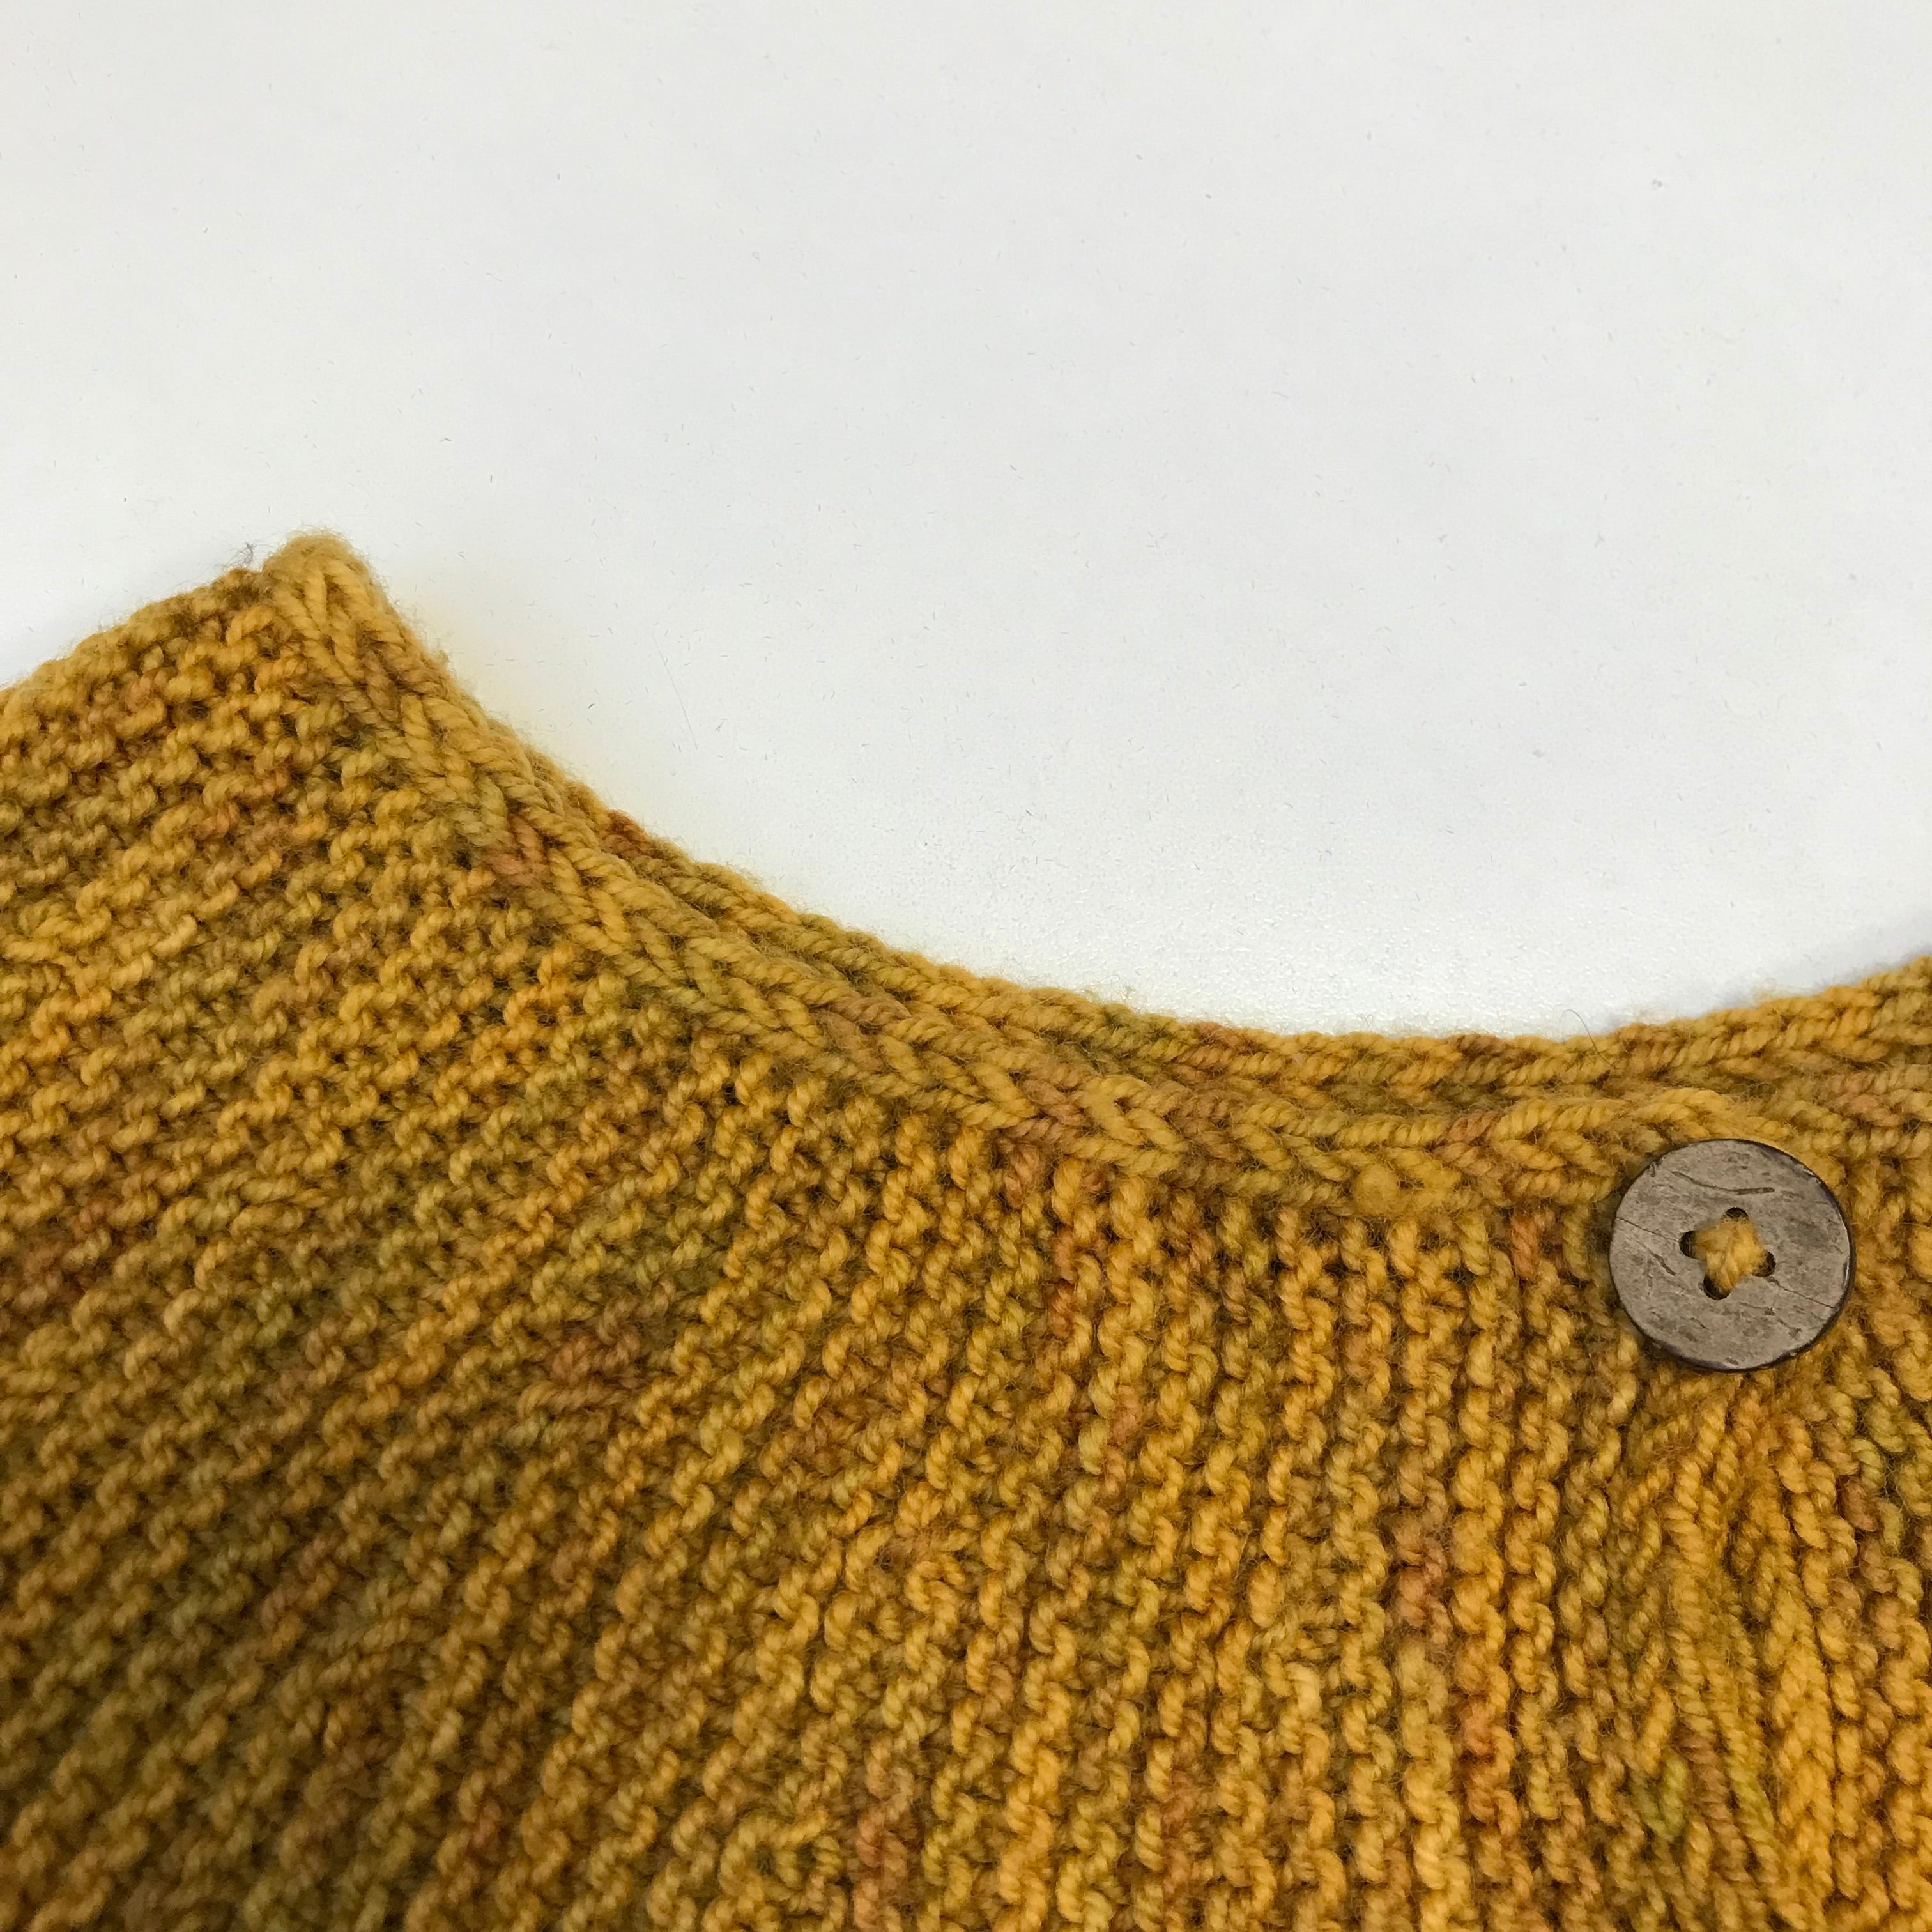 Learn to Knit: Integrated I-Cord Edging | Stolen Stitches Tutorials